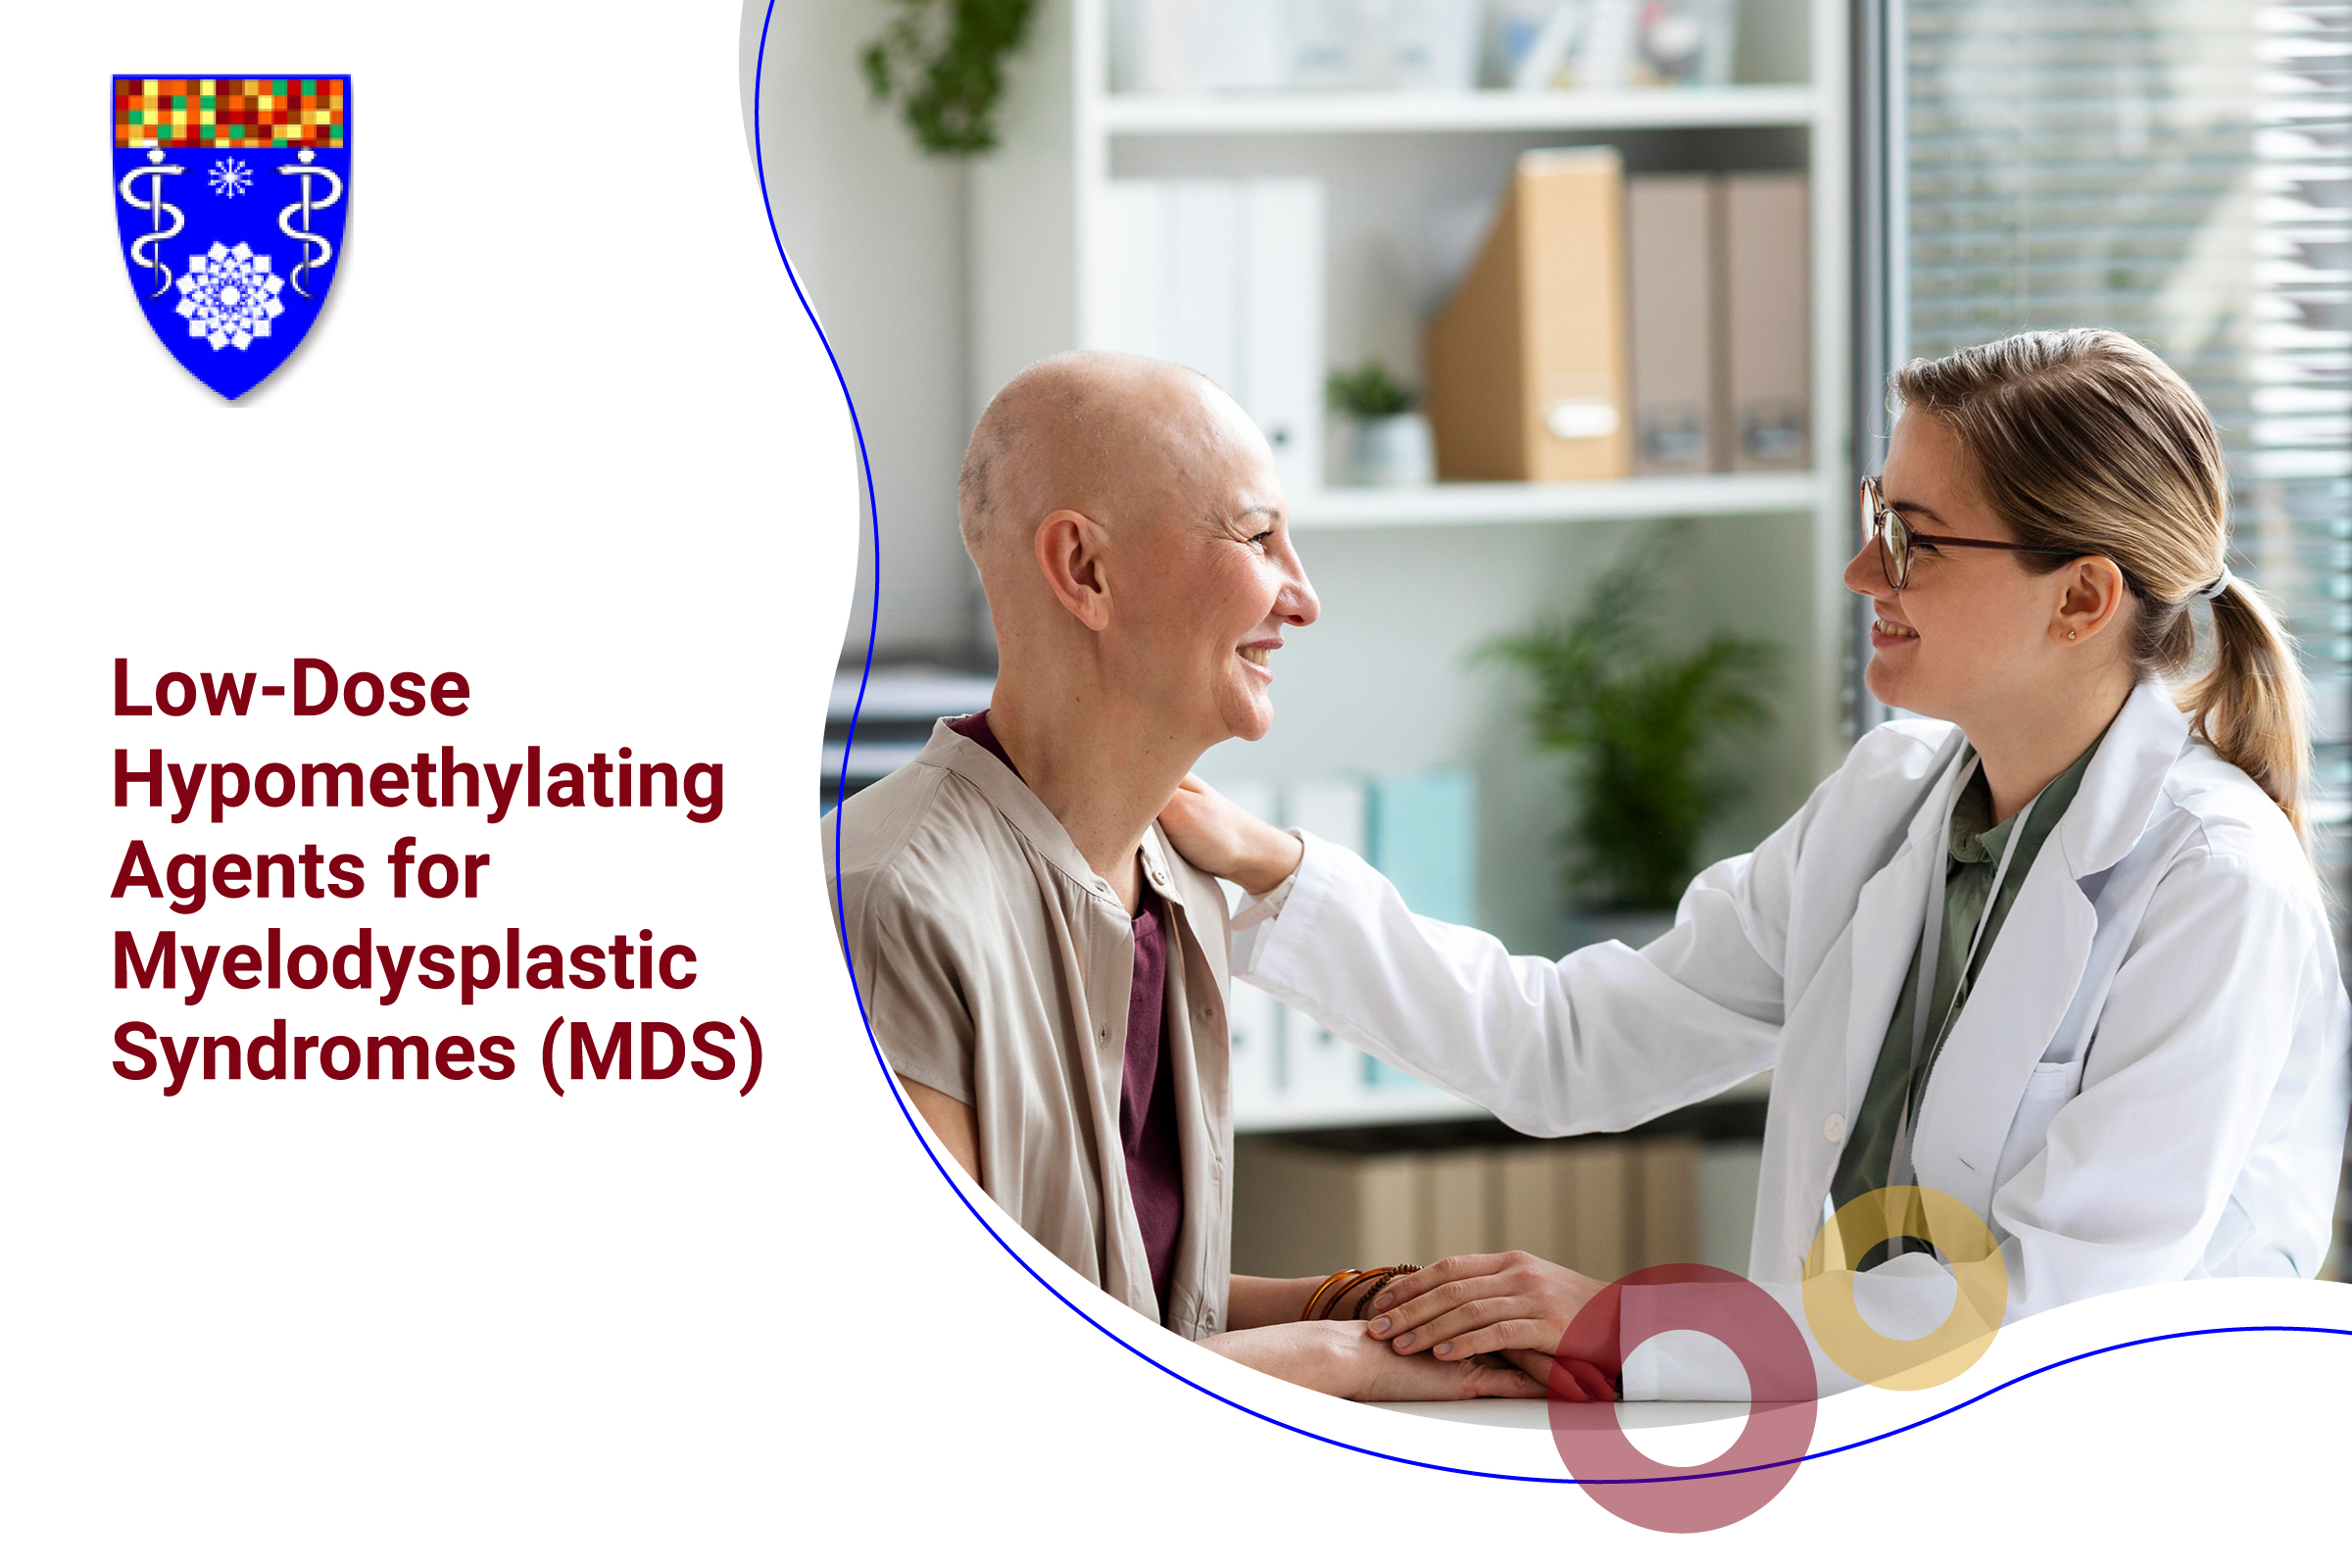 You are currently viewing Low-Dose Hypomethylating Agents for Myelodysplastic Syndromes (MDS)